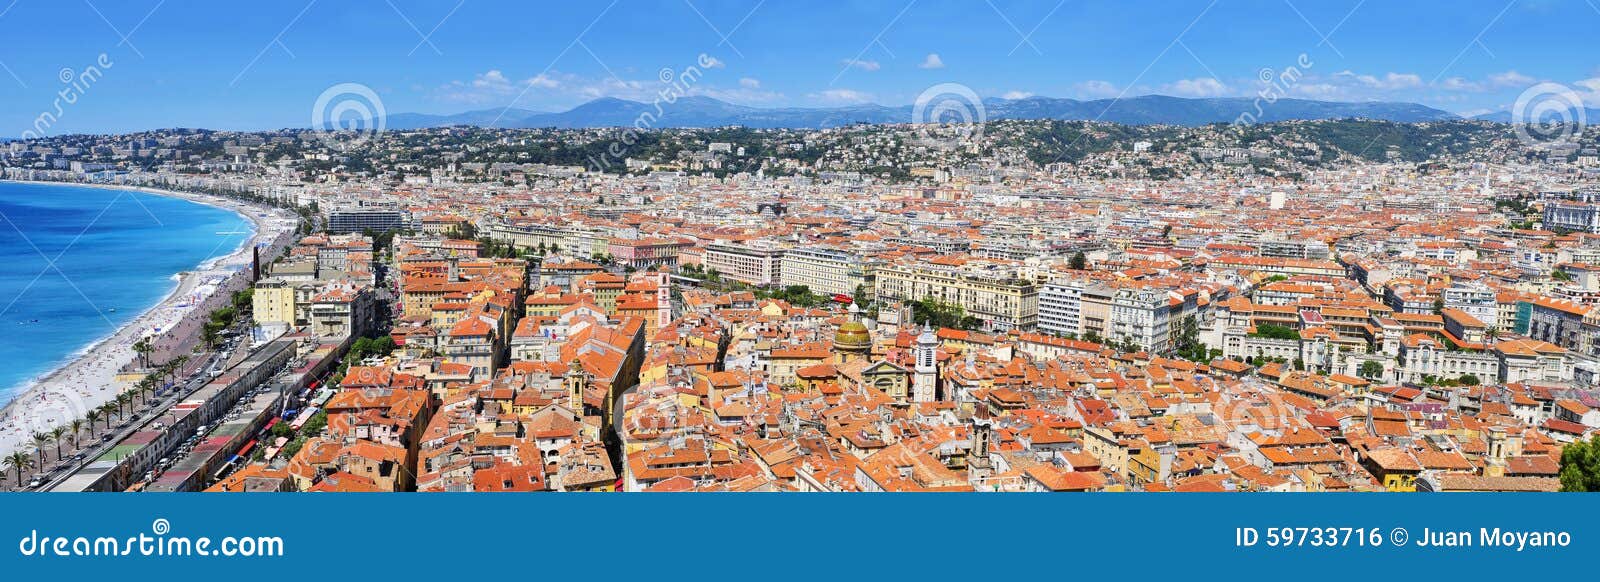 panoramic view of nice, france